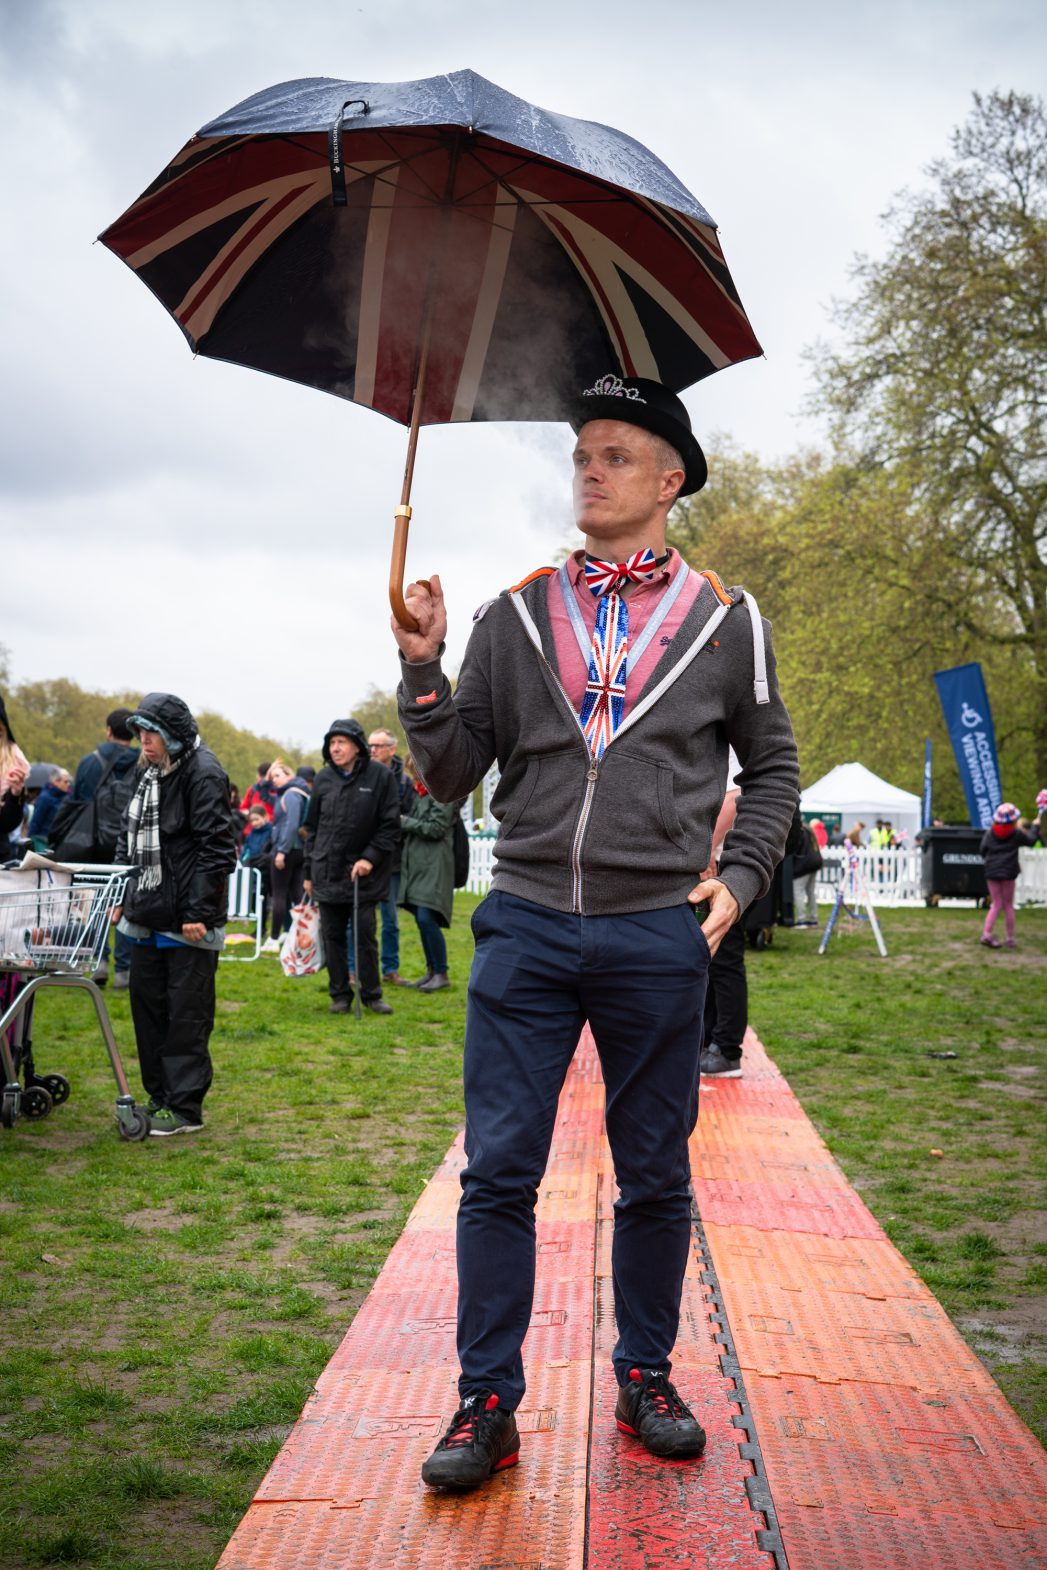 A smartly dressed man photographed wearing a Union Jack tie and umbrella.